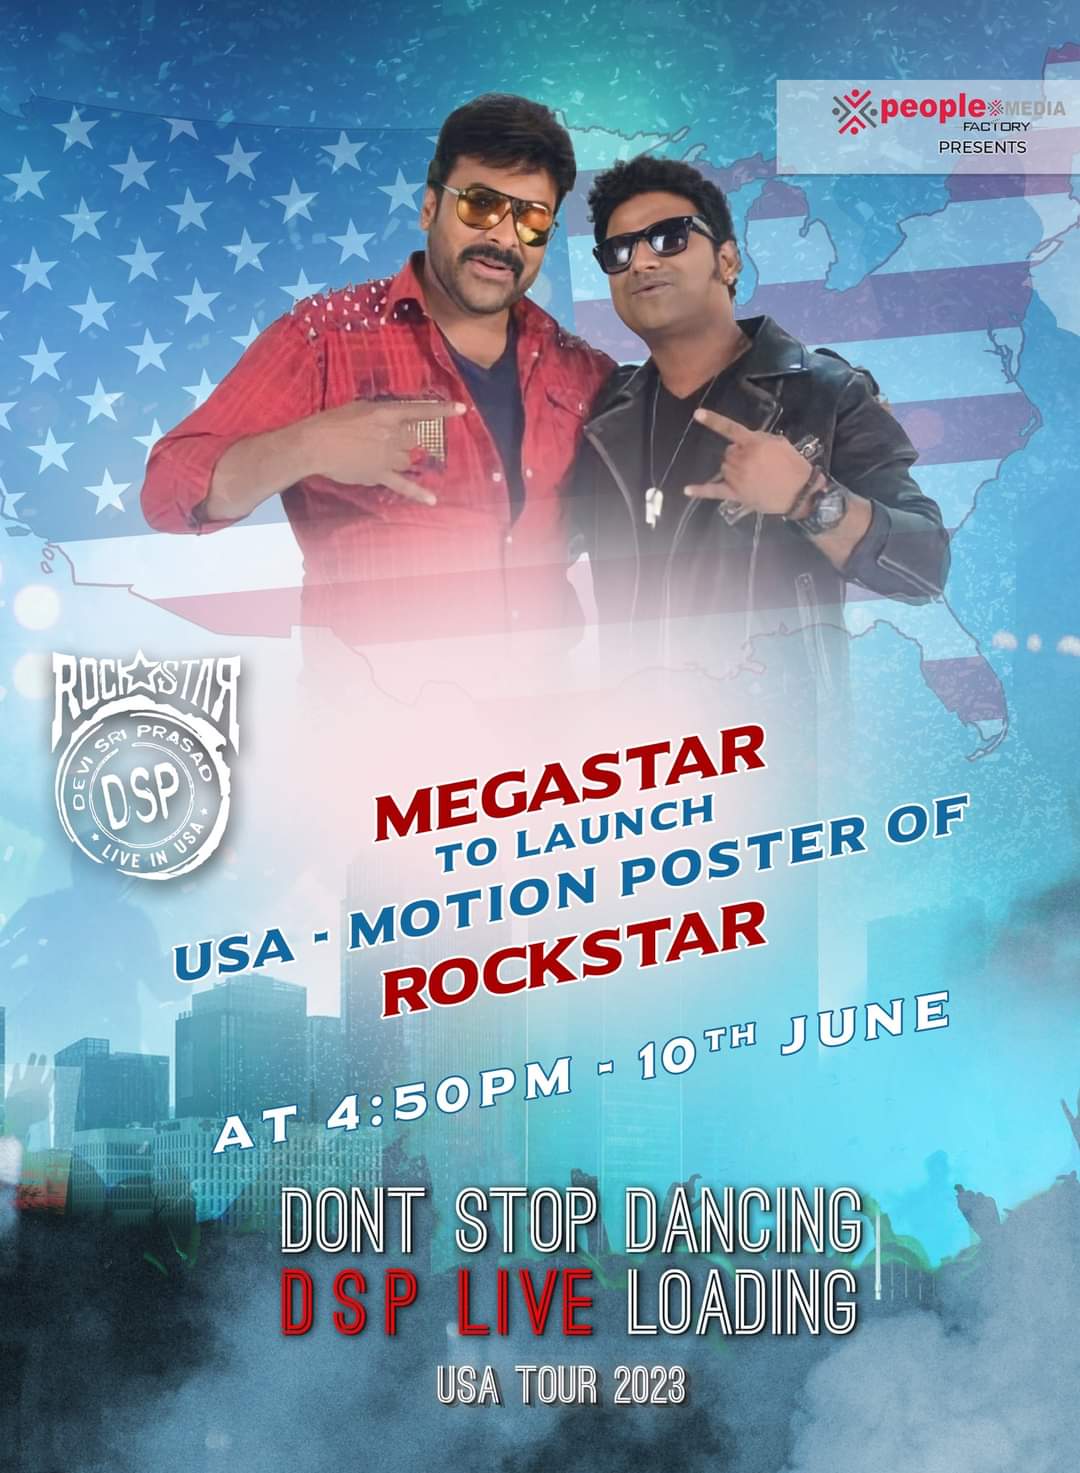 DSP musical concert in USA